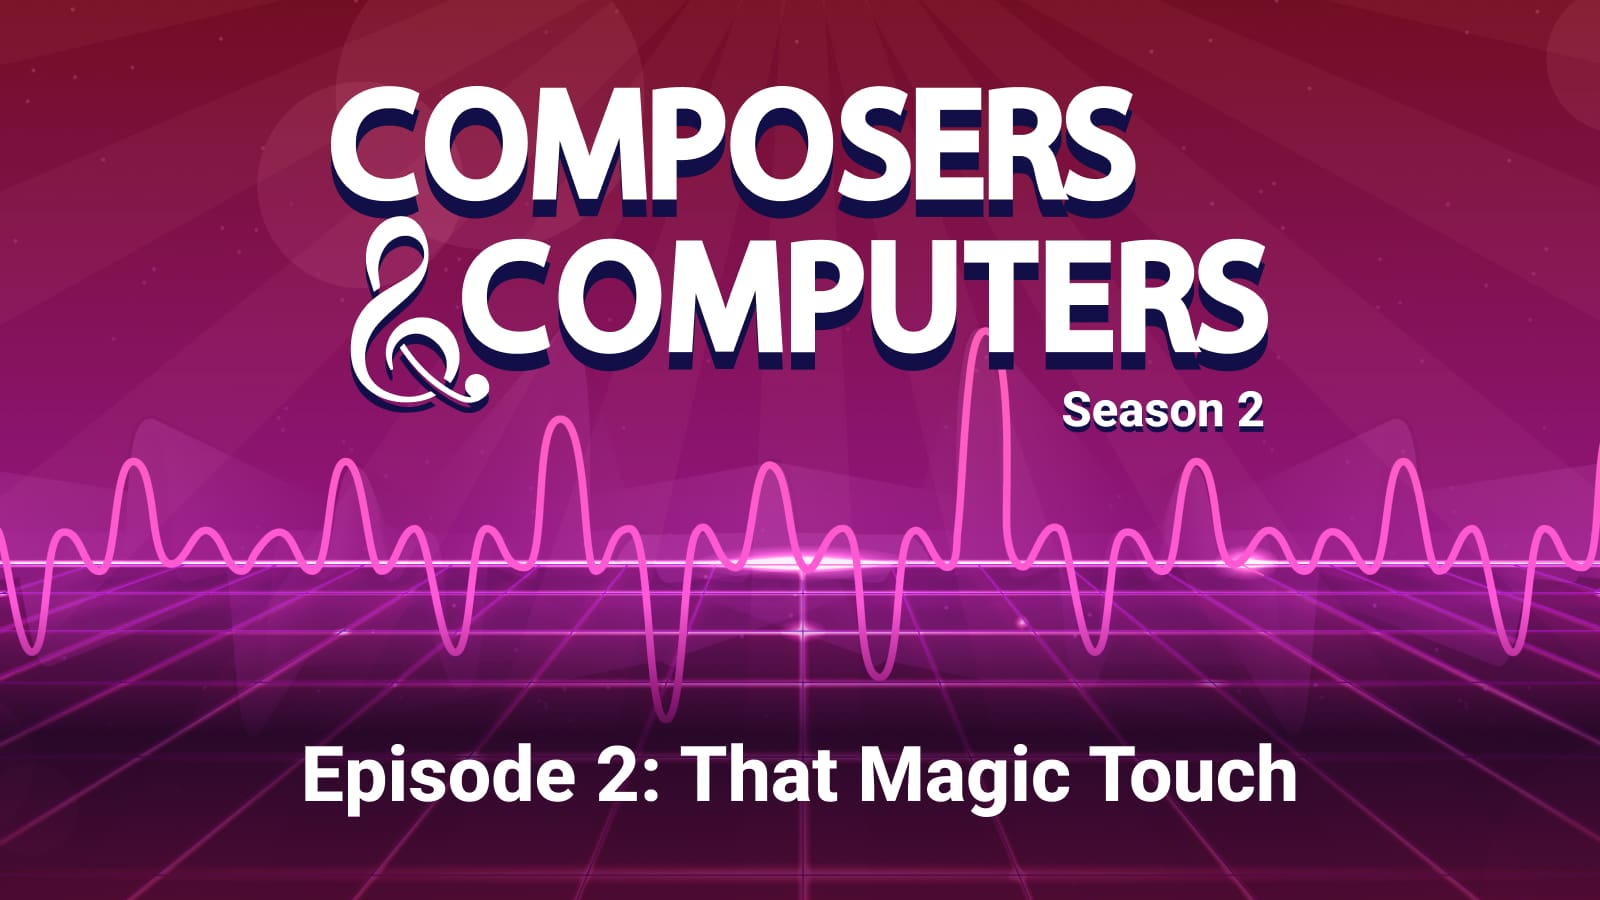 Composers & Computers Episode 2: That Magic Touch